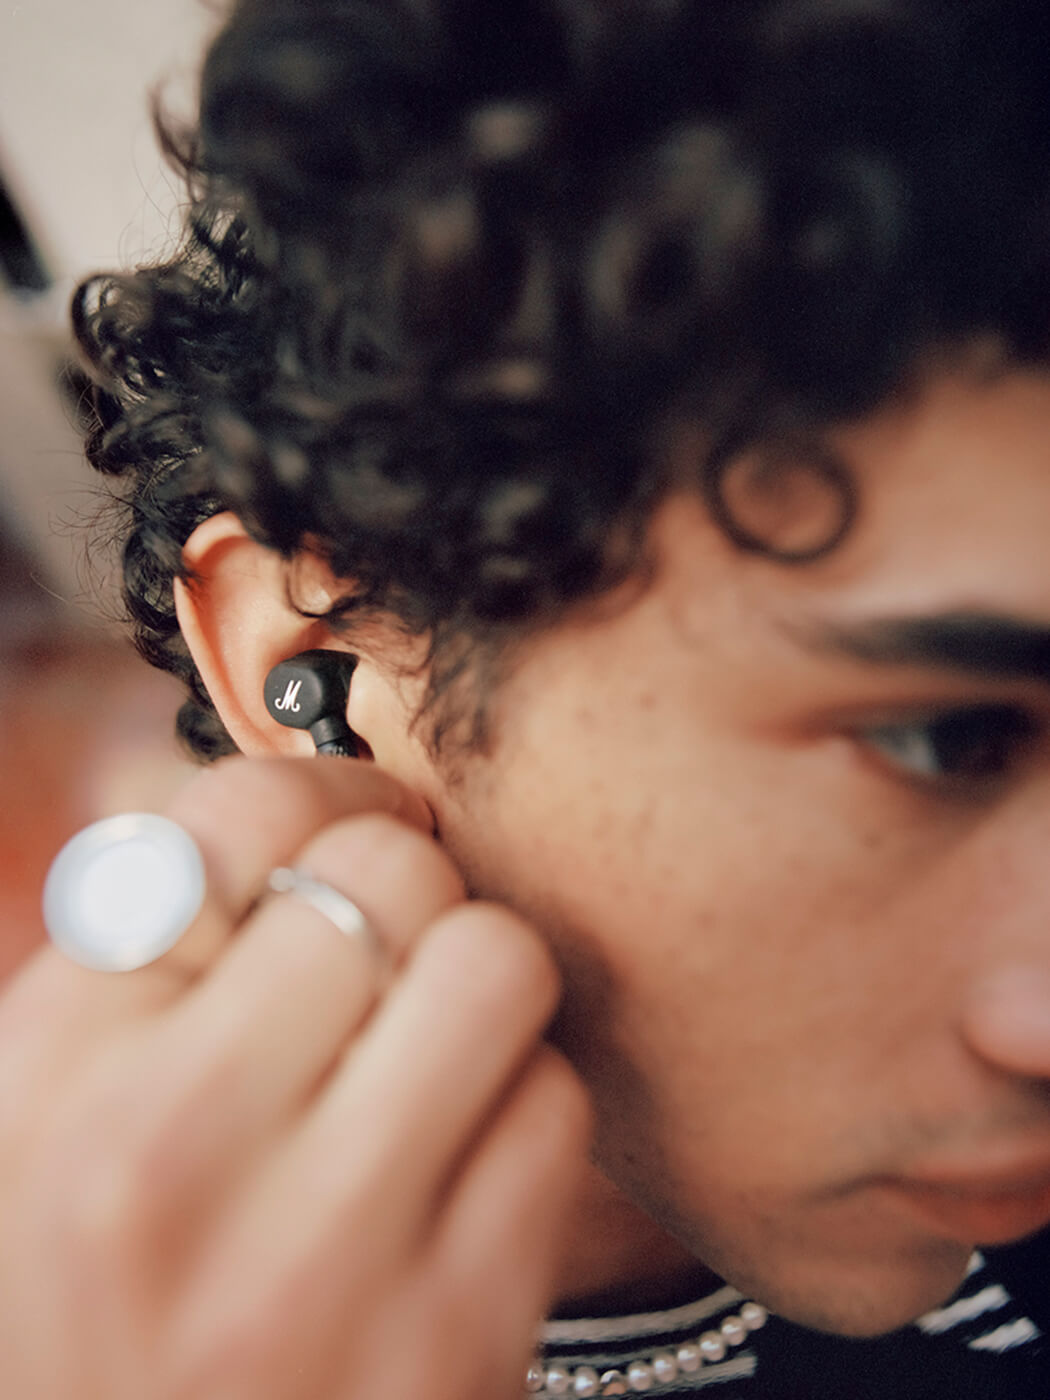 The Motif II ANC earbuds in use